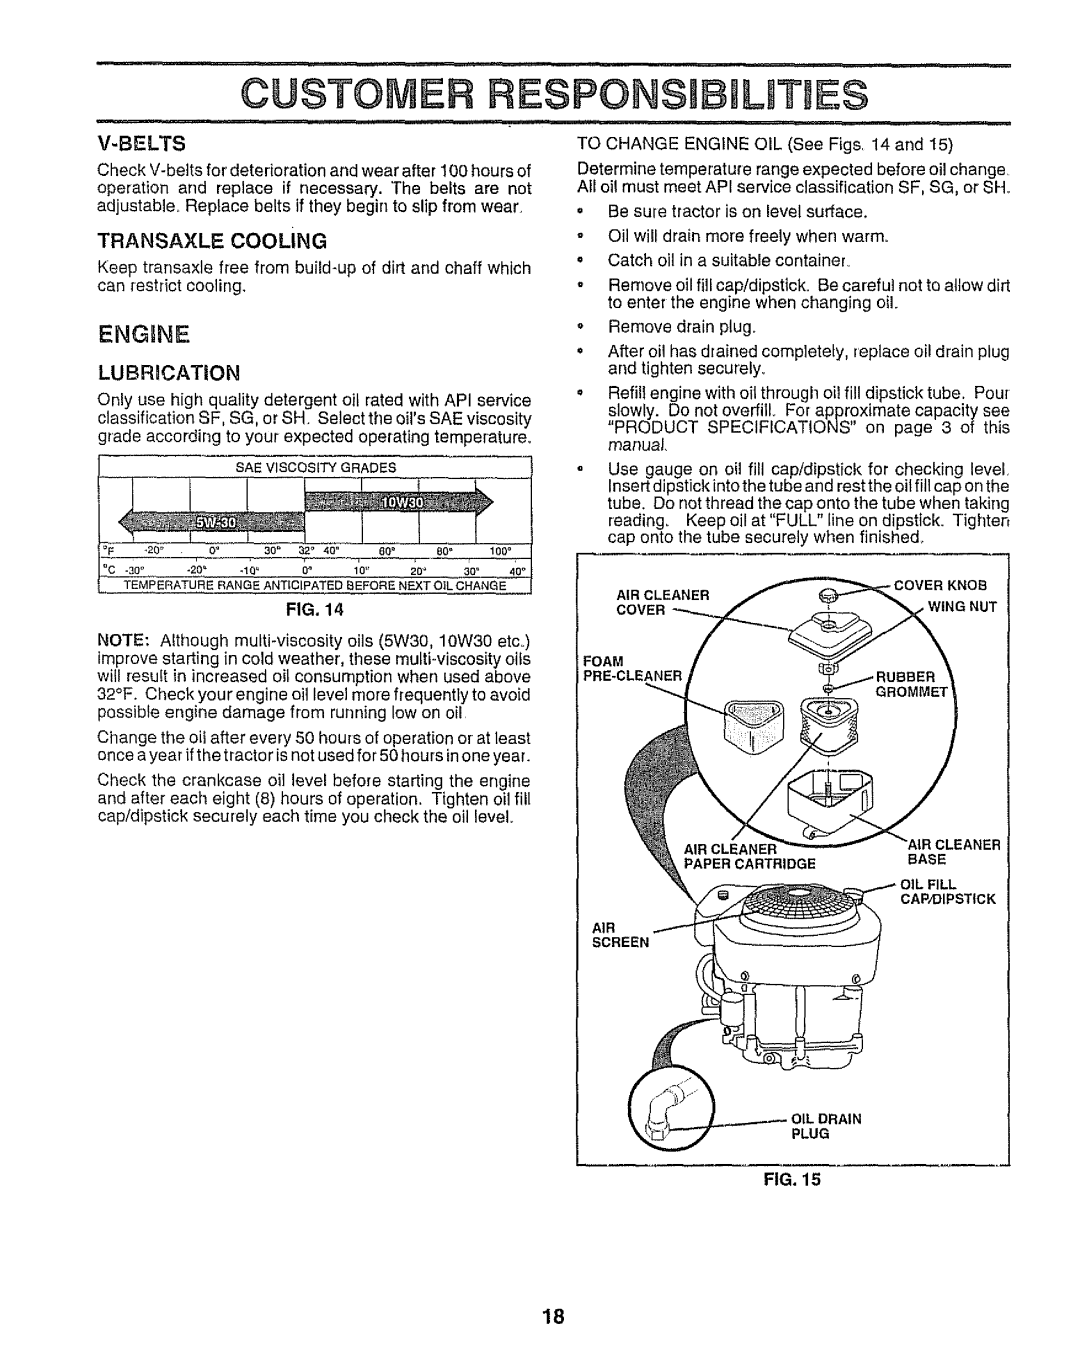 Sears 917.25958 manual CUSTOMER RESPONS BmLITIES, Engine, V-Belts, Transaxle Cooling, LUBRnCATION 